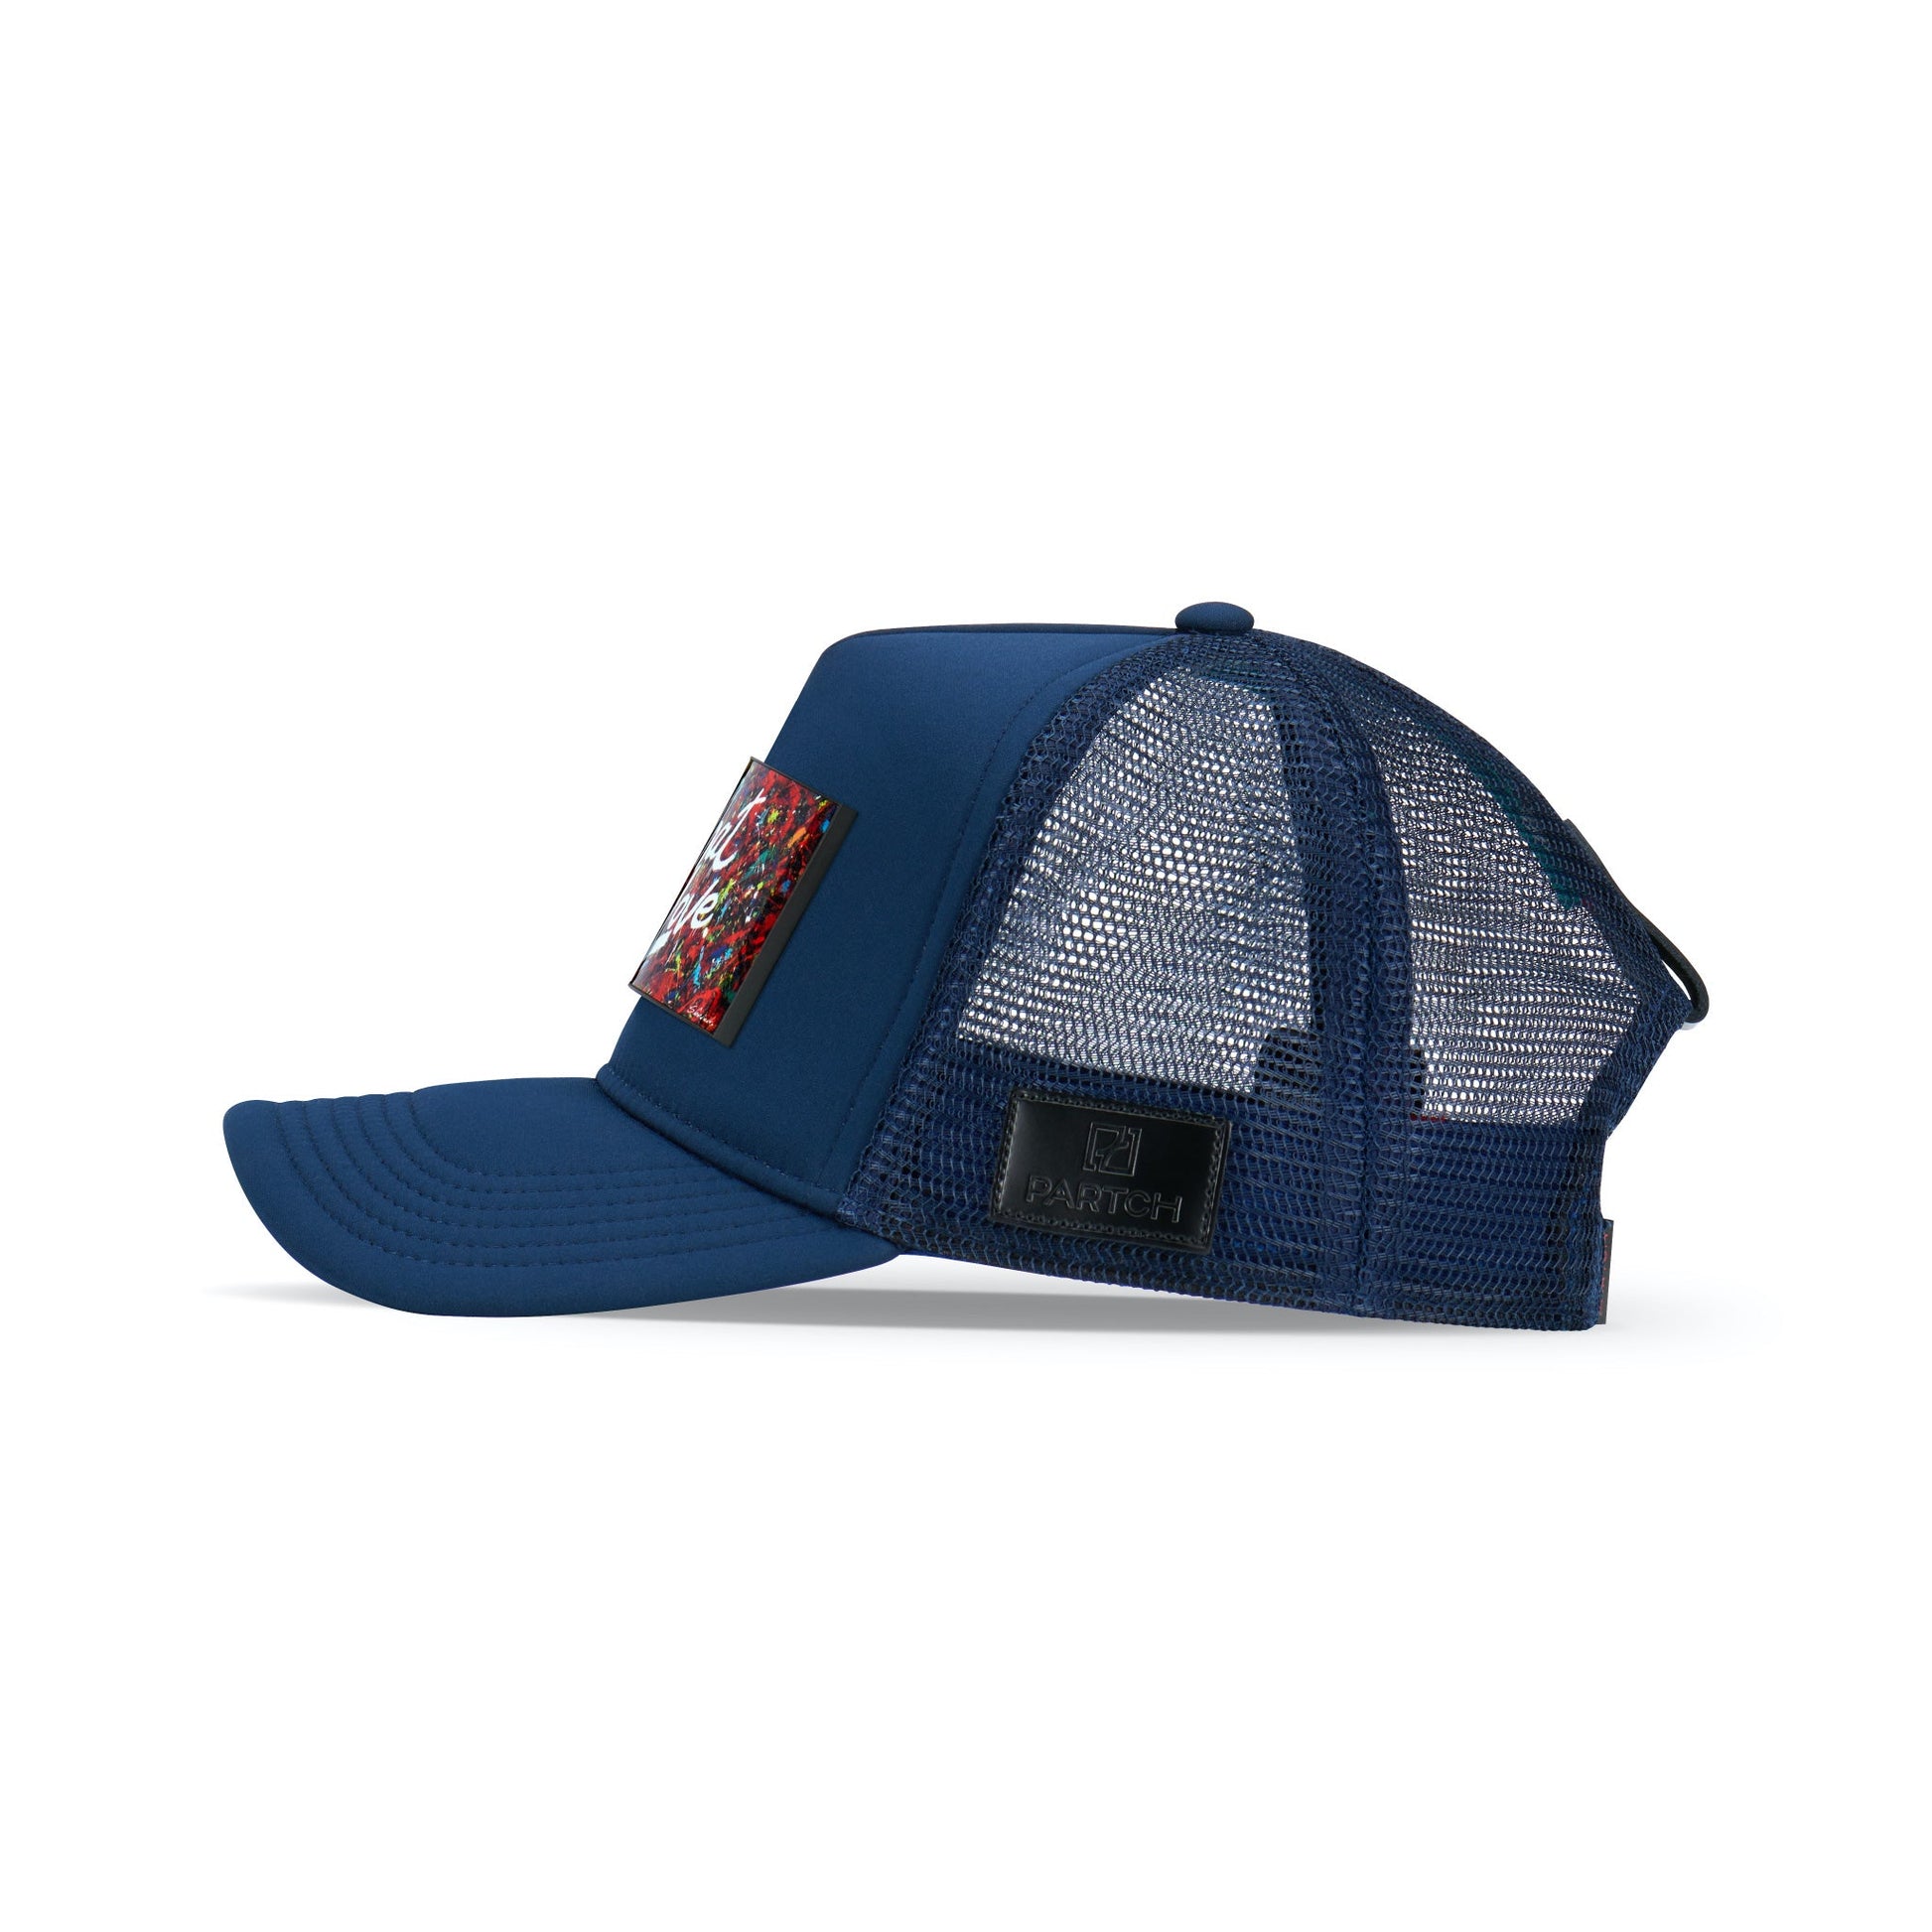 Partch Trucker Hat Navy Blue with PARTCH-Clip DWYL-B77 Side View